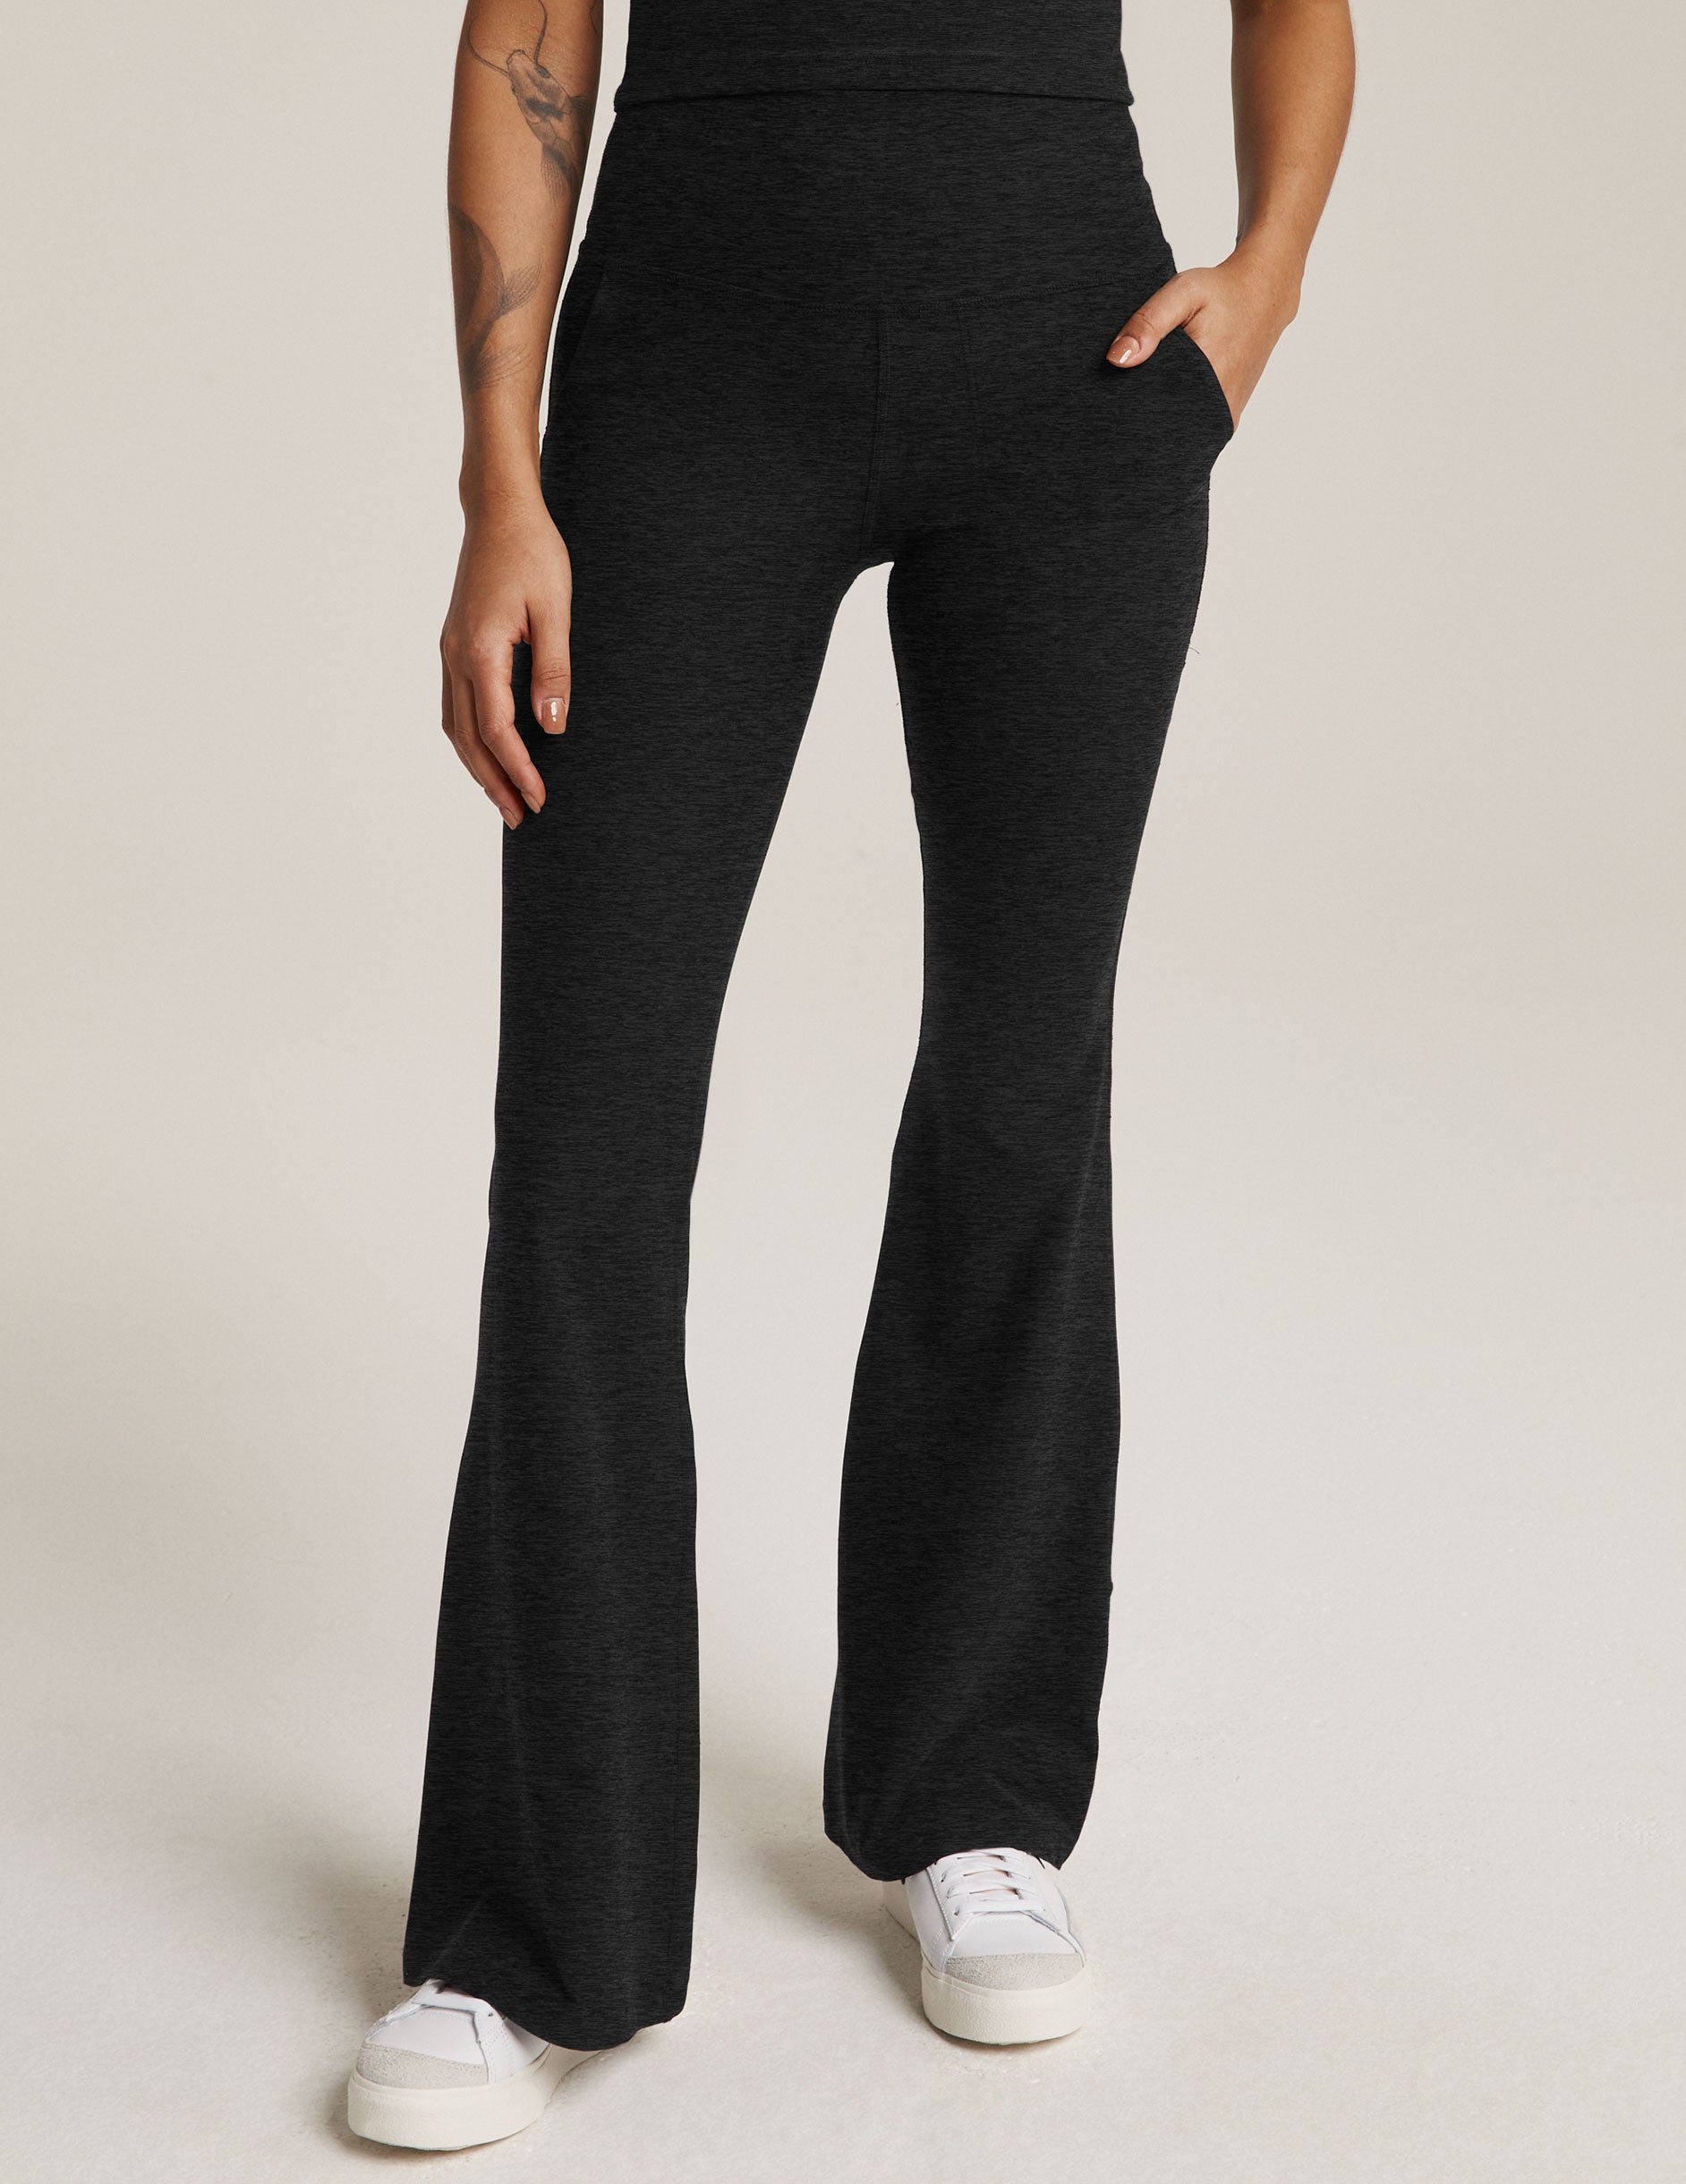 black flare pant with pocket detail